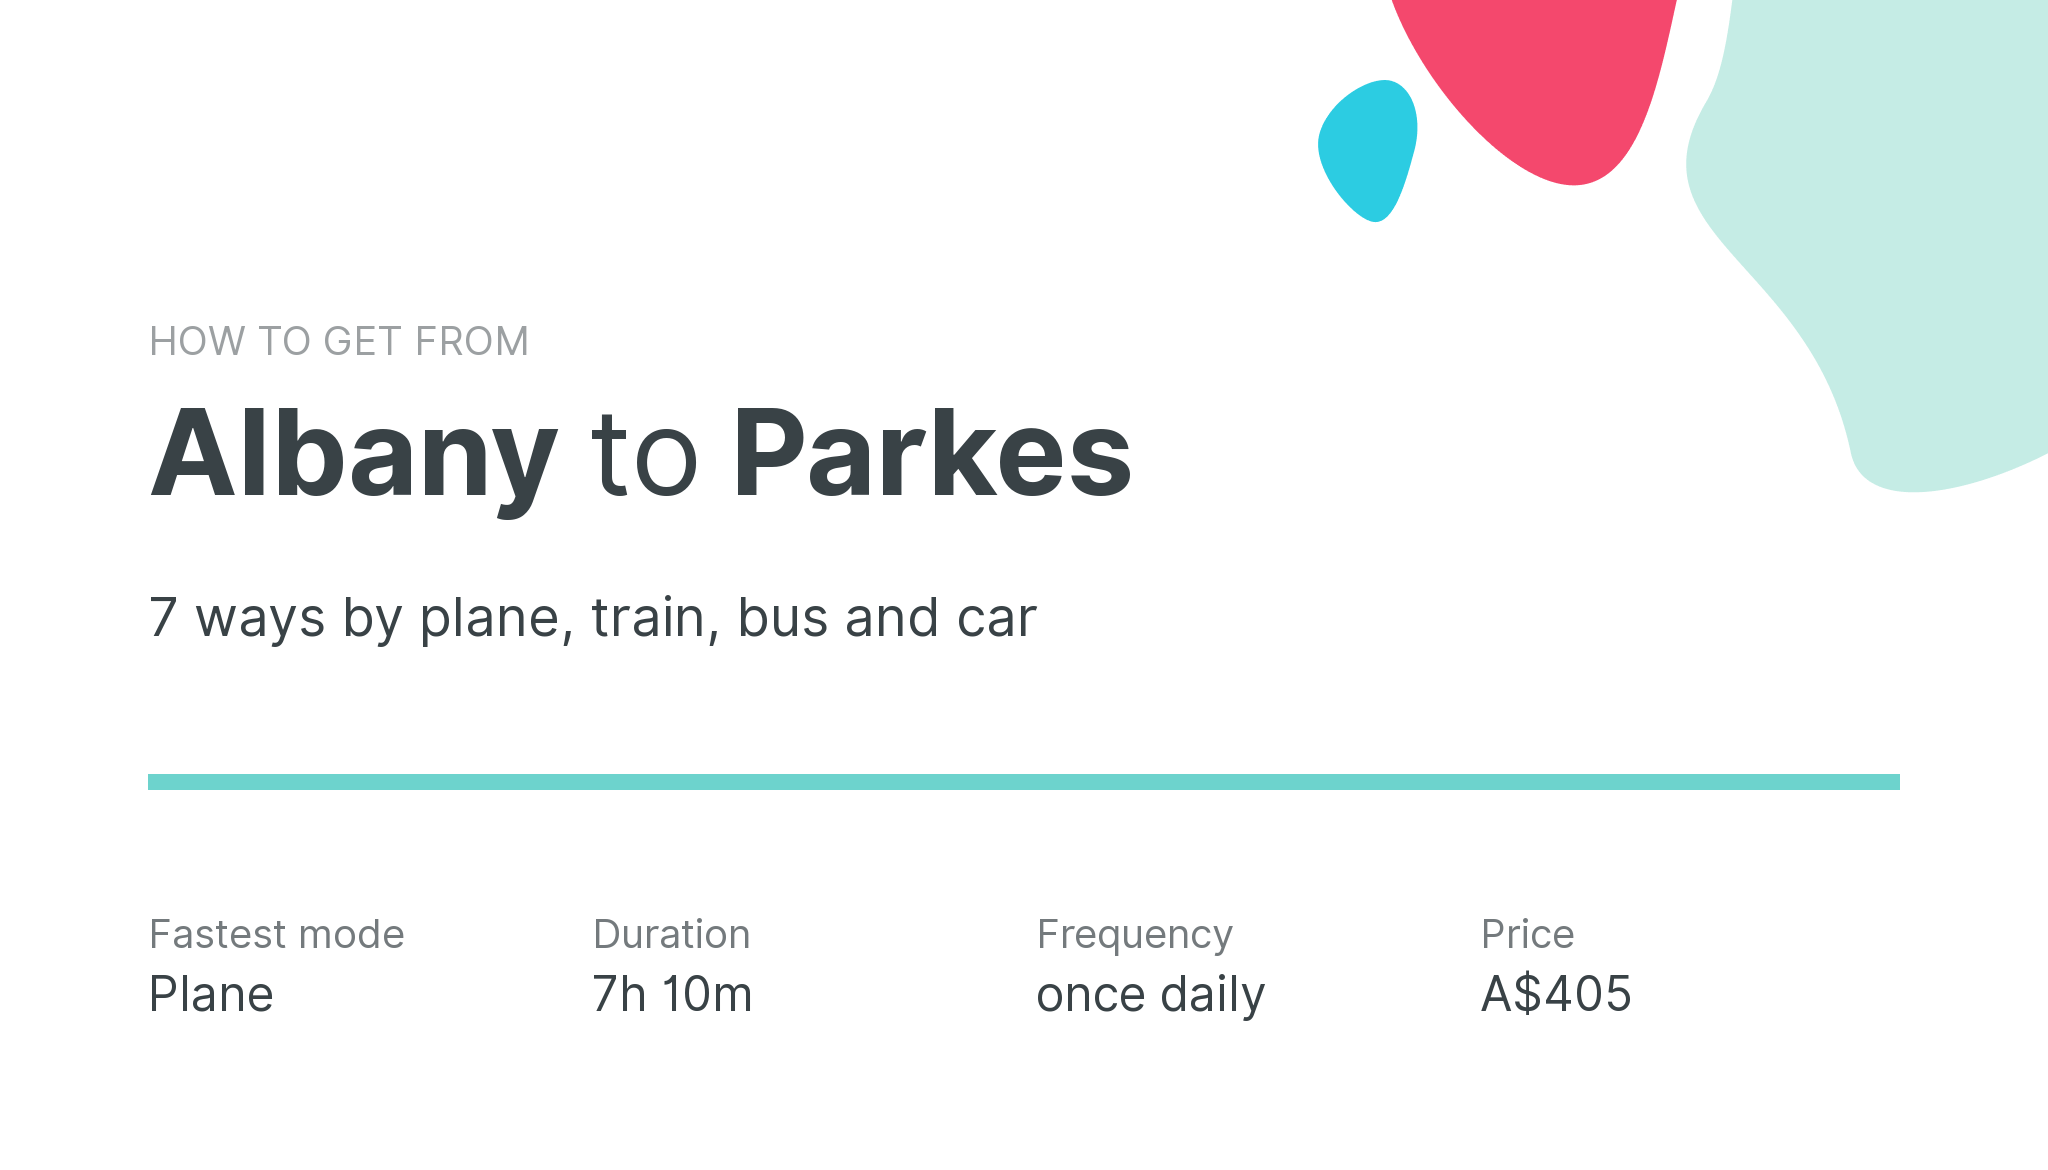 How do I get from Albany to Parkes